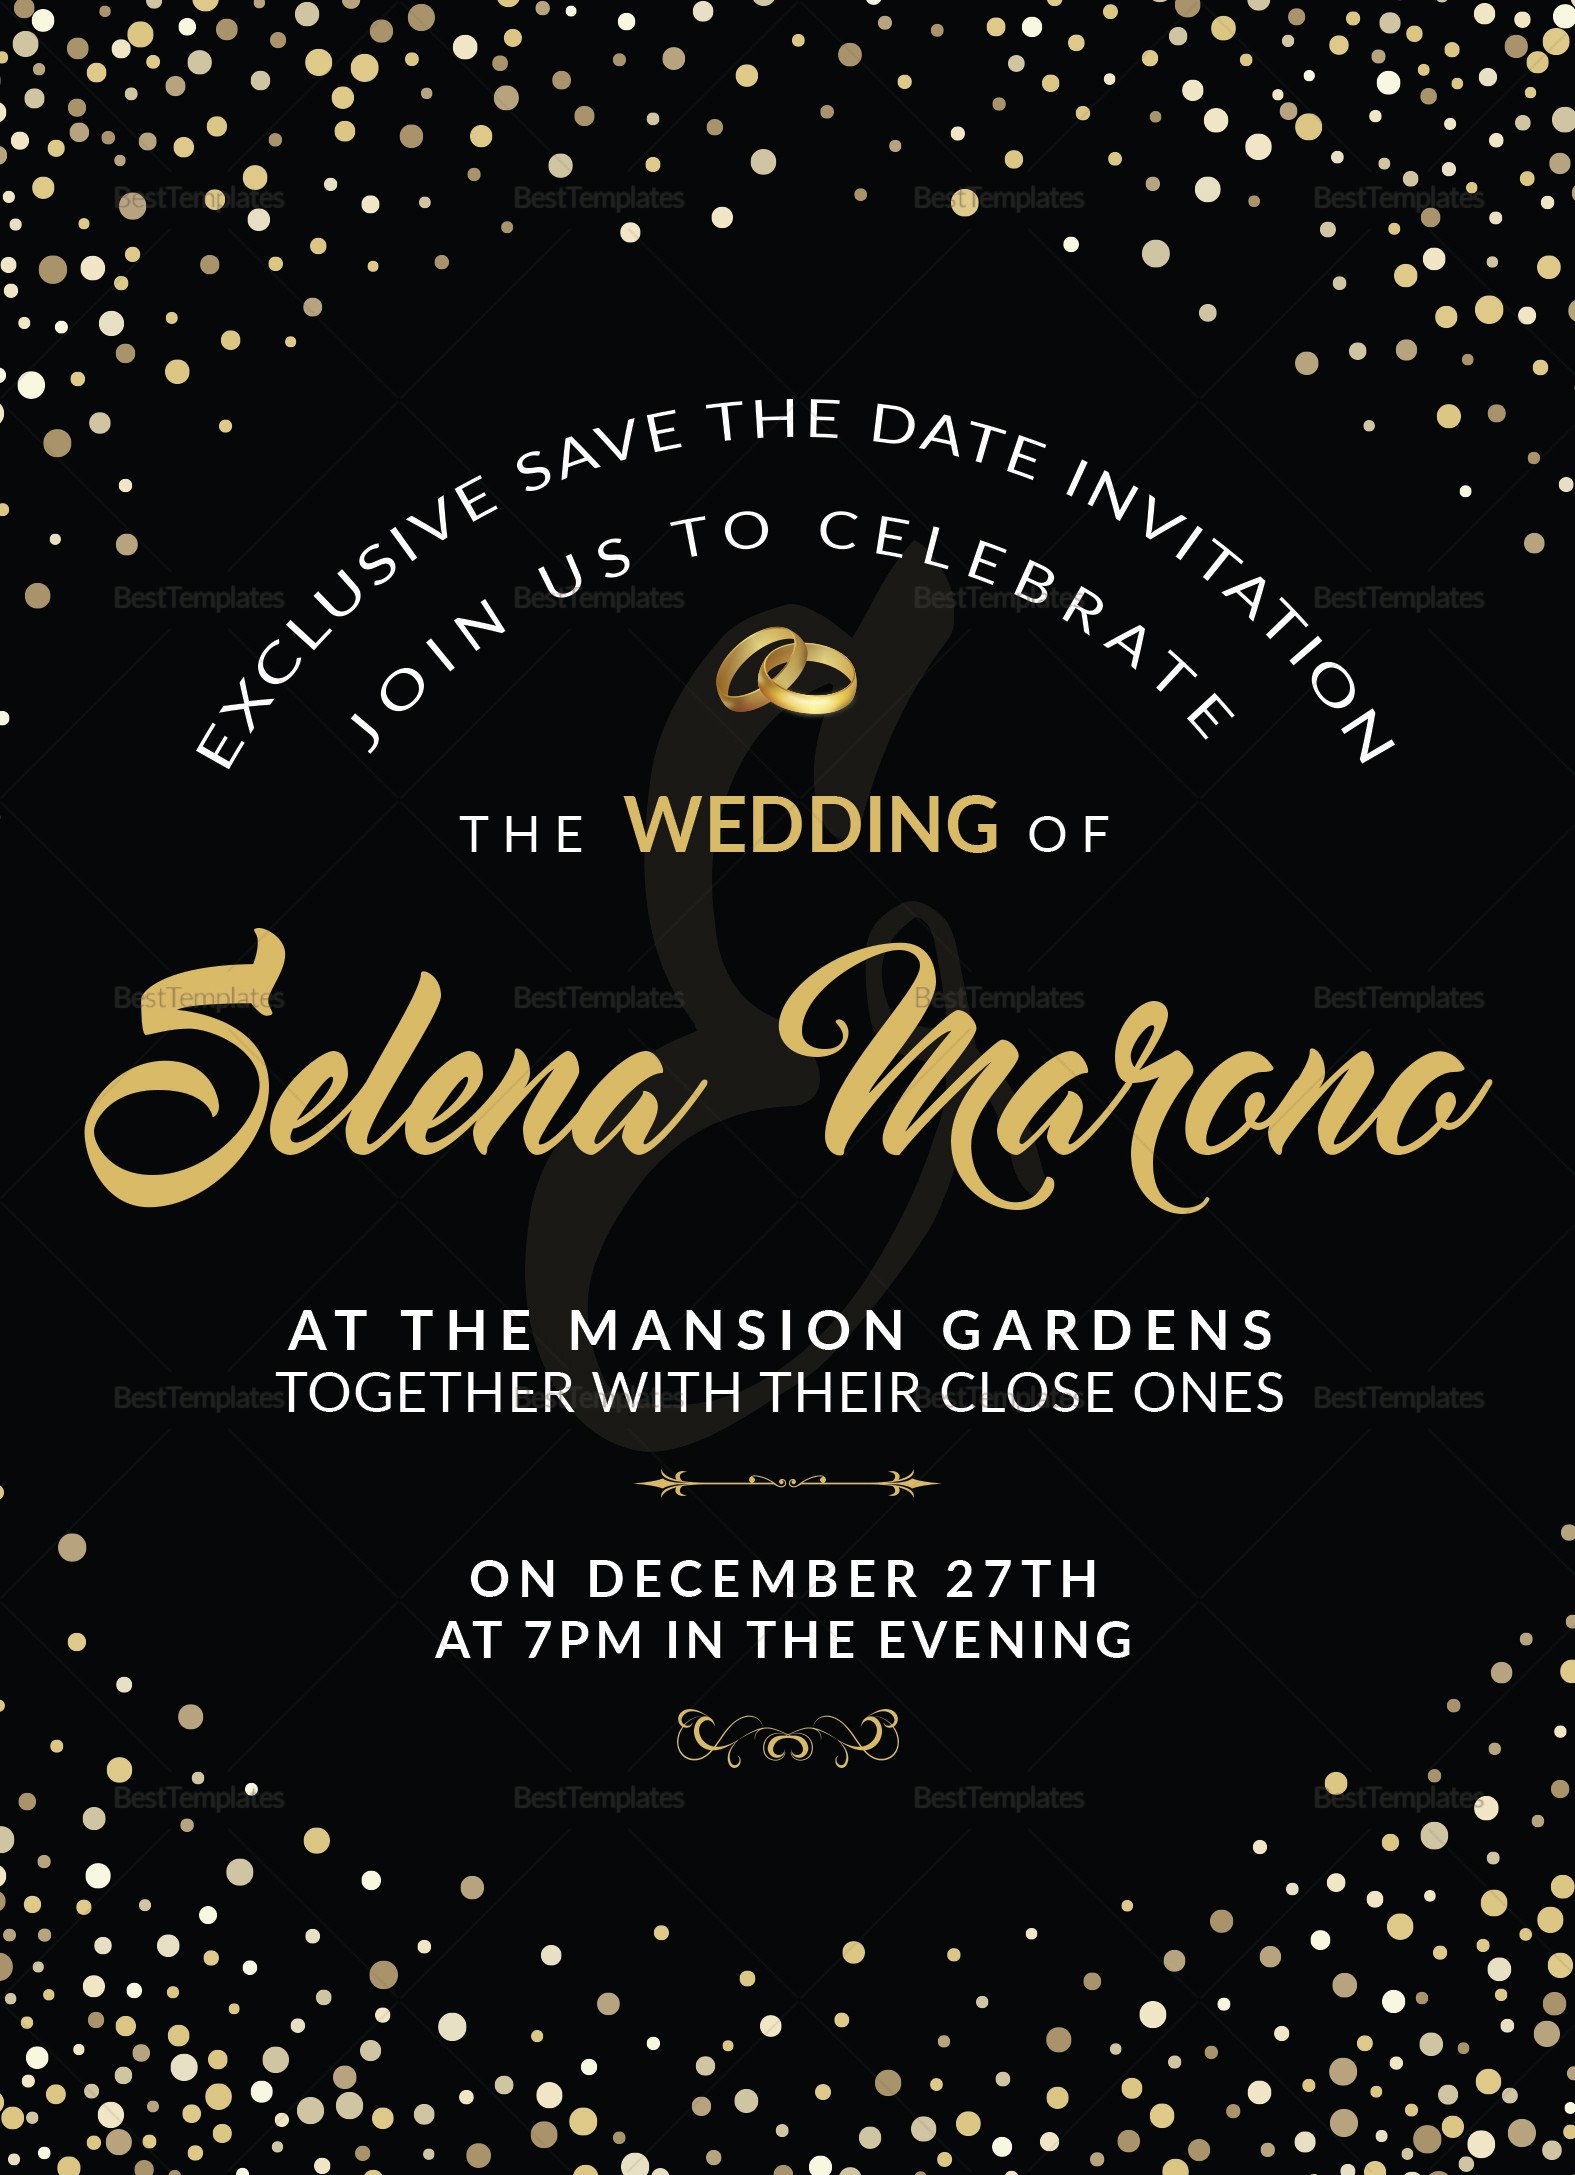 Black and Gold Invitation Template Black and Gold Wedding Invitation Card Design Template In